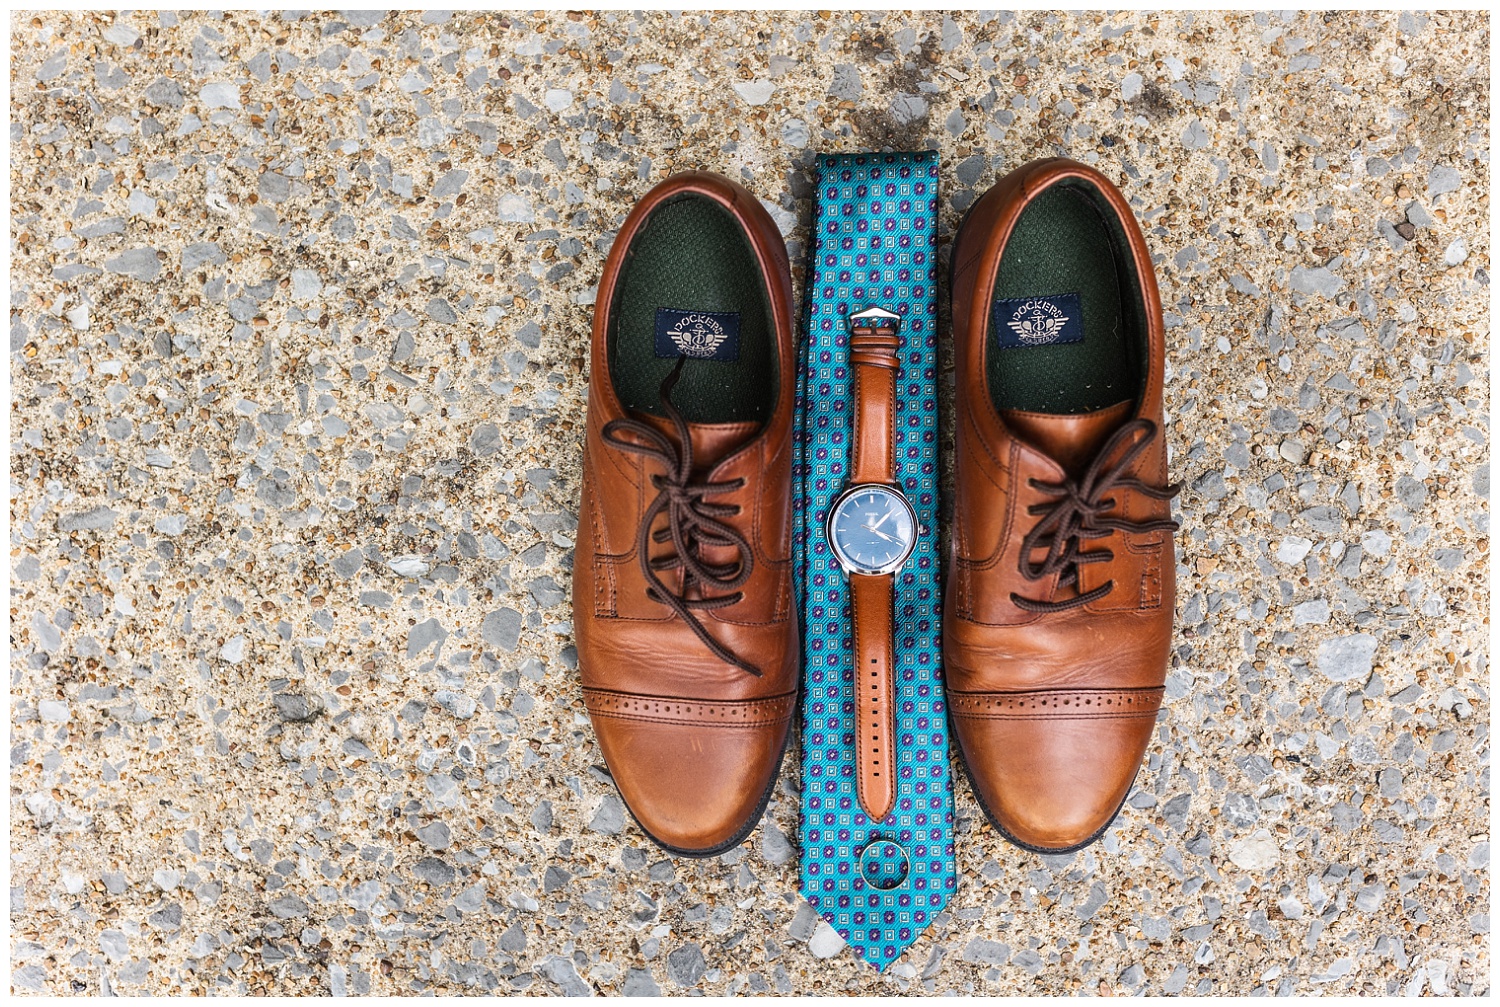 groom's shoes watch and tie at Chattanooga summer wedding